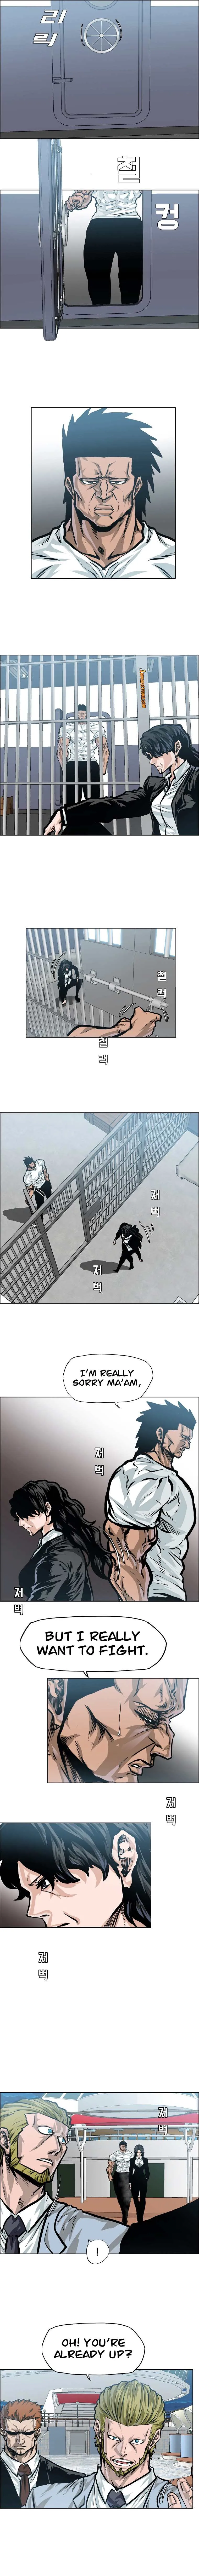 Boss in School Chapter 147 page 4